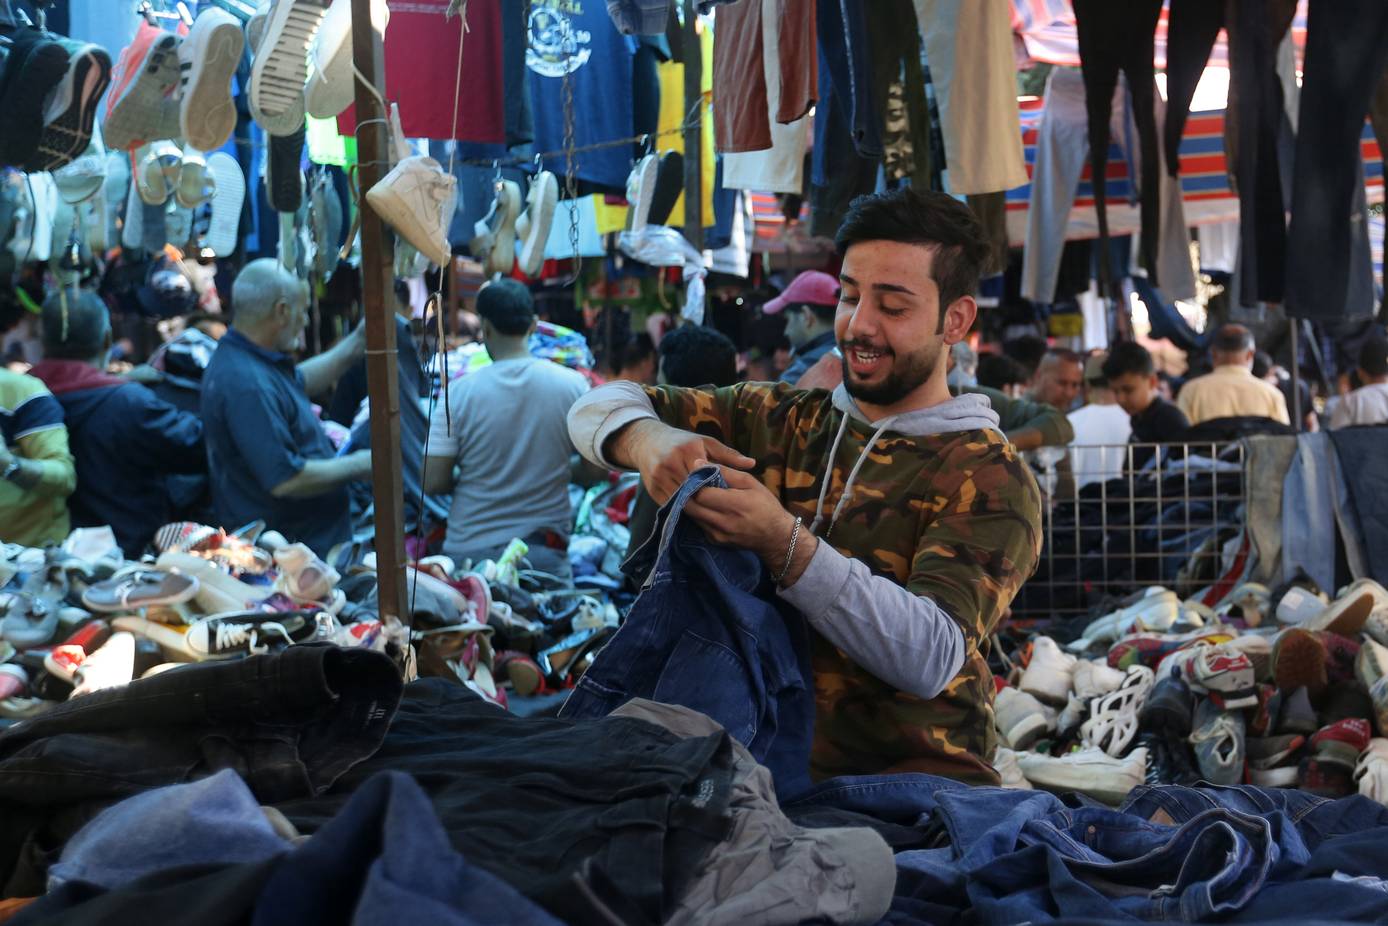 Generation gap widens as young Iraqis embrace Western fashion